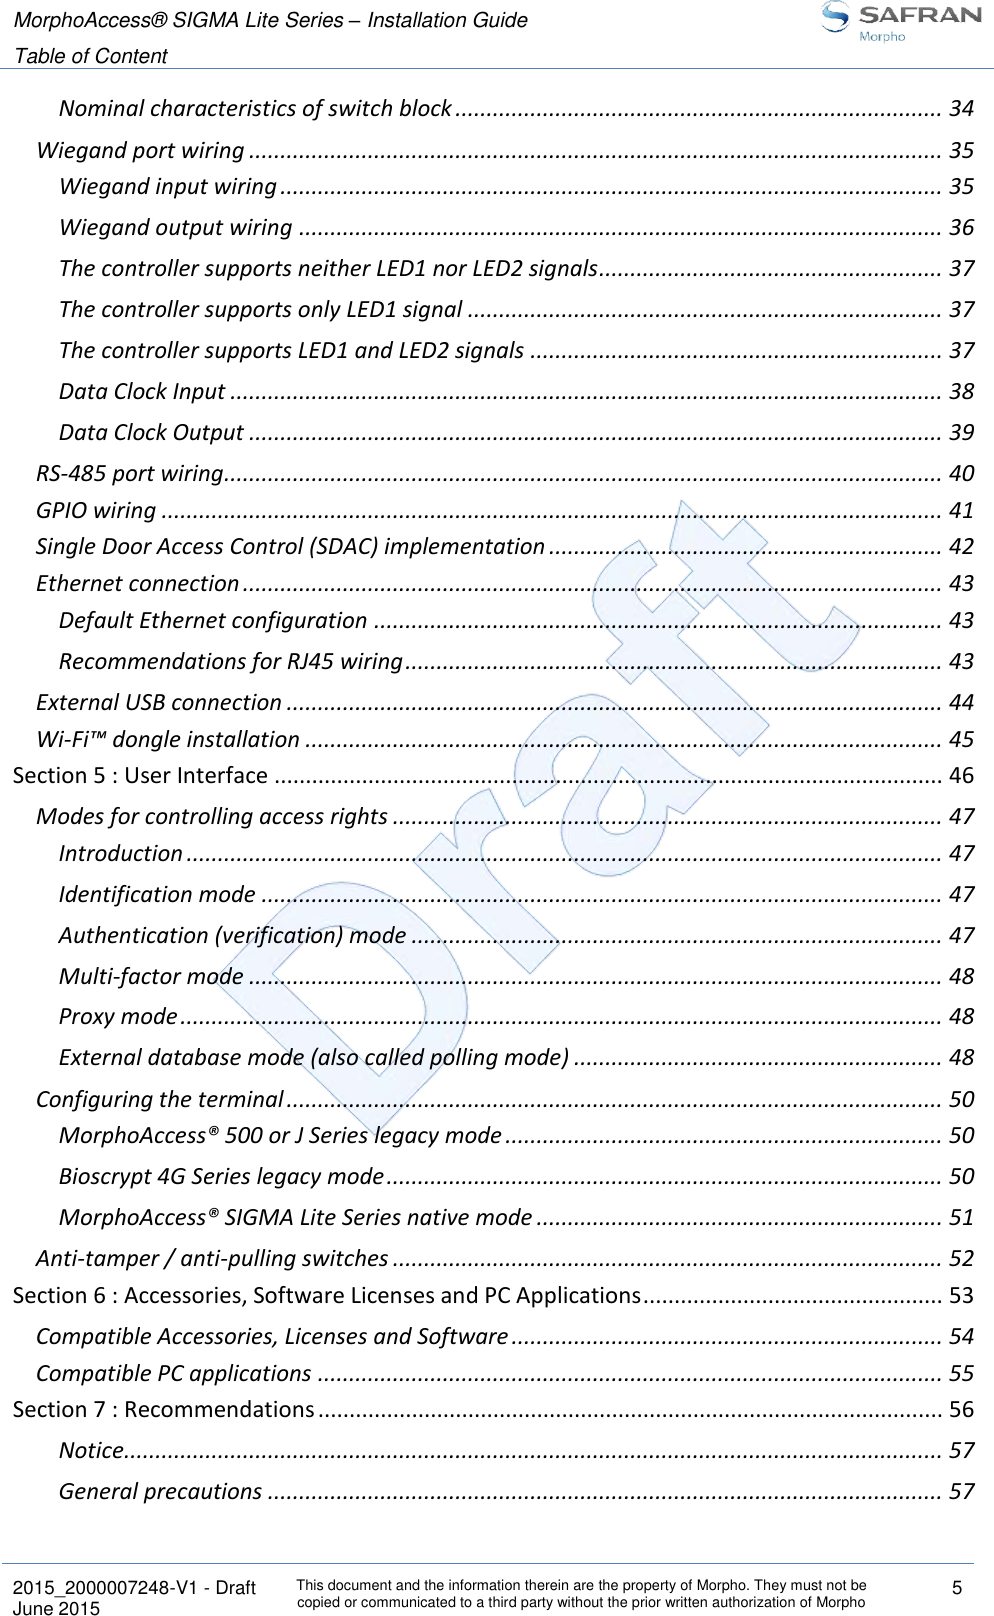 MorphoAccess® SIGMA Lite Series – Installation Guide  Table of Content   2015_2000007248-V1 - Draft This document and the information therein are the property of Morpho. They must not be copied or communicated to a third party without the prior written authorization of Morpho 5 June 2015   Nominal characteristics of switch block .............................................................................. 34 Wiegand port wiring ............................................................................................................... 35 Wiegand input wiring .......................................................................................................... 35 Wiegand output wiring ....................................................................................................... 36 The controller supports neither LED1 nor LED2 signals ....................................................... 37 The controller supports only LED1 signal ............................................................................ 37 The controller supports LED1 and LED2 signals .................................................................. 37 Data Clock Input .................................................................................................................. 38 Data Clock Output ............................................................................................................... 39 RS-485 port wiring ................................................................................................................... 40 GPIO wiring ............................................................................................................................. 41 Single Door Access Control (SDAC) implementation ............................................................... 42 Ethernet connection ................................................................................................................ 43 Default Ethernet configuration ........................................................................................... 43 Recommendations for RJ45 wiring ...................................................................................... 43 External USB connection ......................................................................................................... 44 Wi-Fi™ dongle installation ...................................................................................................... 45 Section 5 : User Interface ........................................................................................................... 46 Modes for controlling access rights ........................................................................................ 47 Introduction ......................................................................................................................... 47 Identification mode ............................................................................................................. 47 Authentication (verification) mode ..................................................................................... 47 Multi-factor mode ............................................................................................................... 48 Proxy mode .......................................................................................................................... 48 External database mode (also called polling mode) ........................................................... 48 Configuring the terminal ......................................................................................................... 50 MorphoAccess® 500 or J Series legacy mode ...................................................................... 50 Bioscrypt 4G Series legacy mode ......................................................................................... 50 MorphoAccess® SIGMA Lite Series native mode ................................................................. 51 Anti-tamper / anti-pulling switches ........................................................................................ 52 Section 6 : Accessories, Software Licenses and PC Applications ................................................ 53 Compatible Accessories, Licenses and Software ..................................................................... 54 Compatible PC applications .................................................................................................... 55 Section 7 : Recommendations .................................................................................................... 56 Notice................................................................................................................................... 57 General precautions ............................................................................................................ 57 